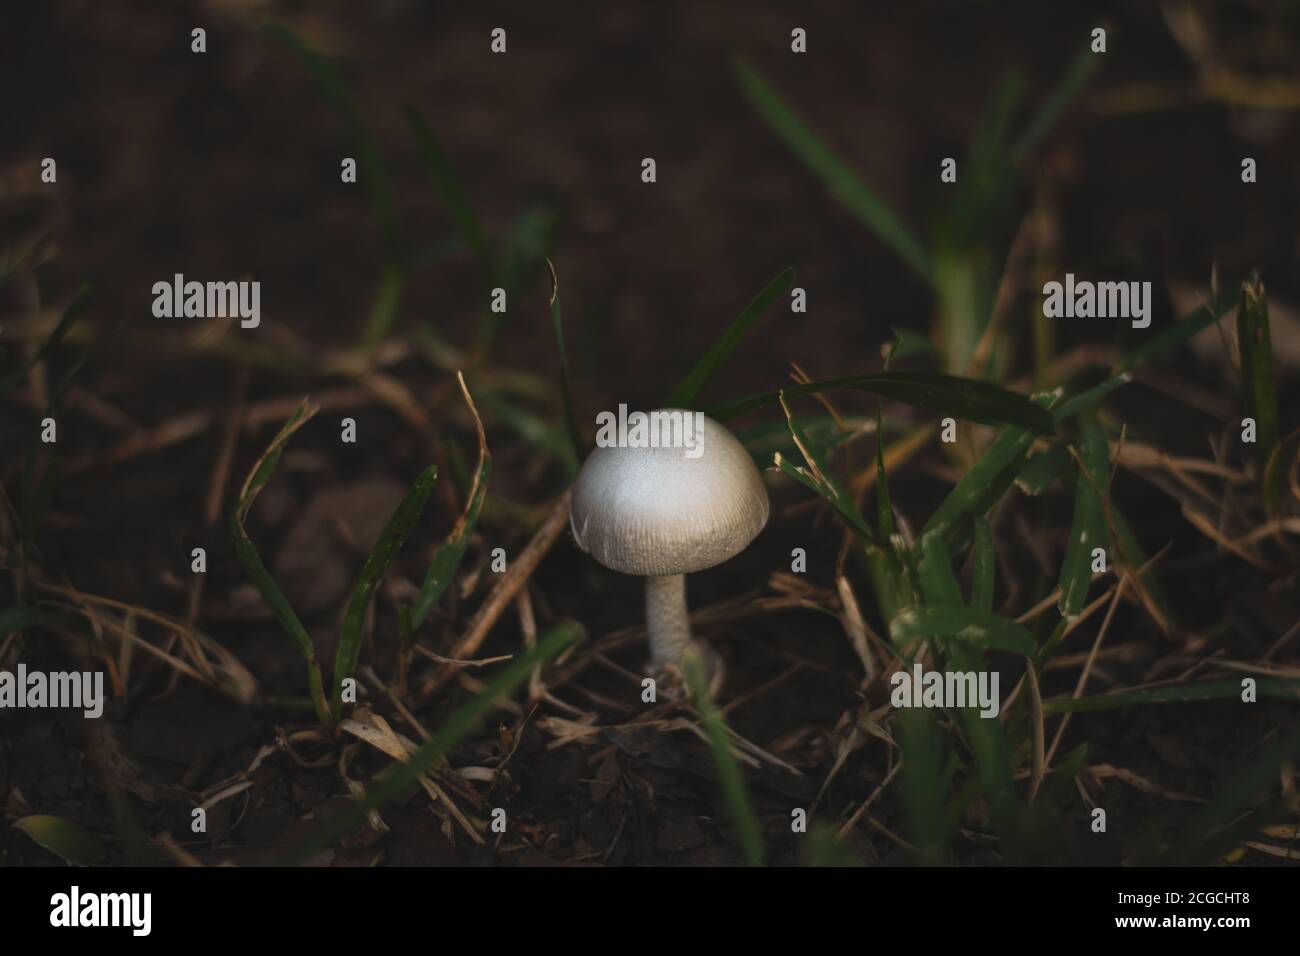 One small white isolated mushroom in grass Stock Photo